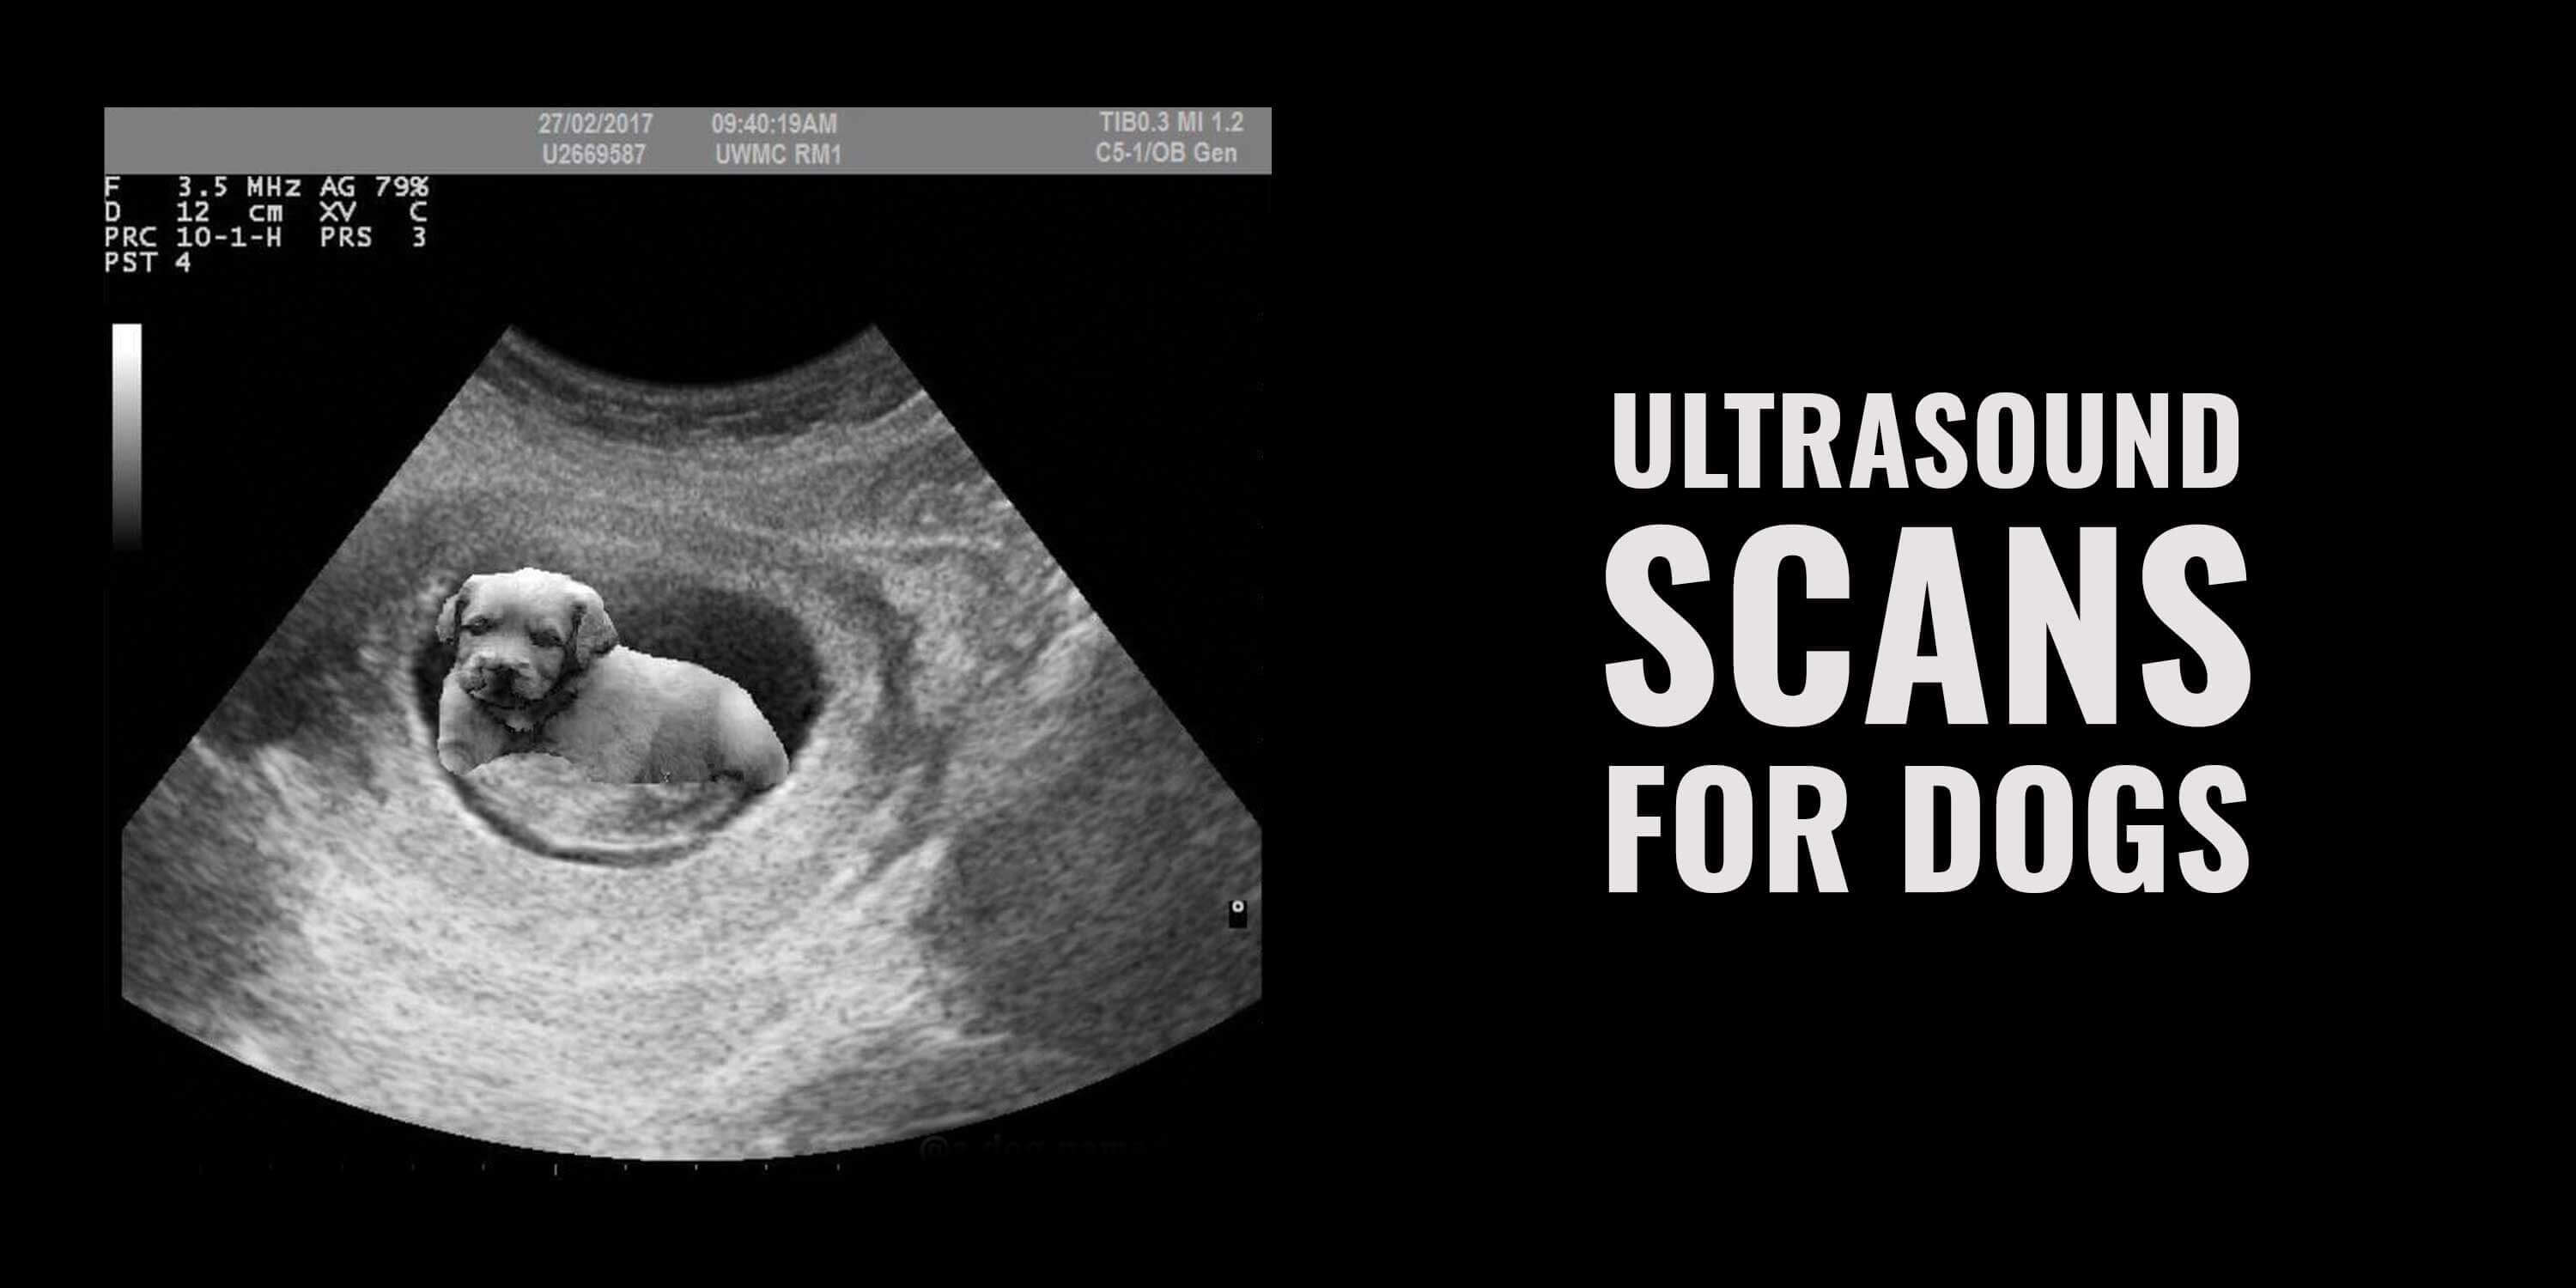 Ultrasound Scans for Dogs Cost, Use Cases, Procedure & More